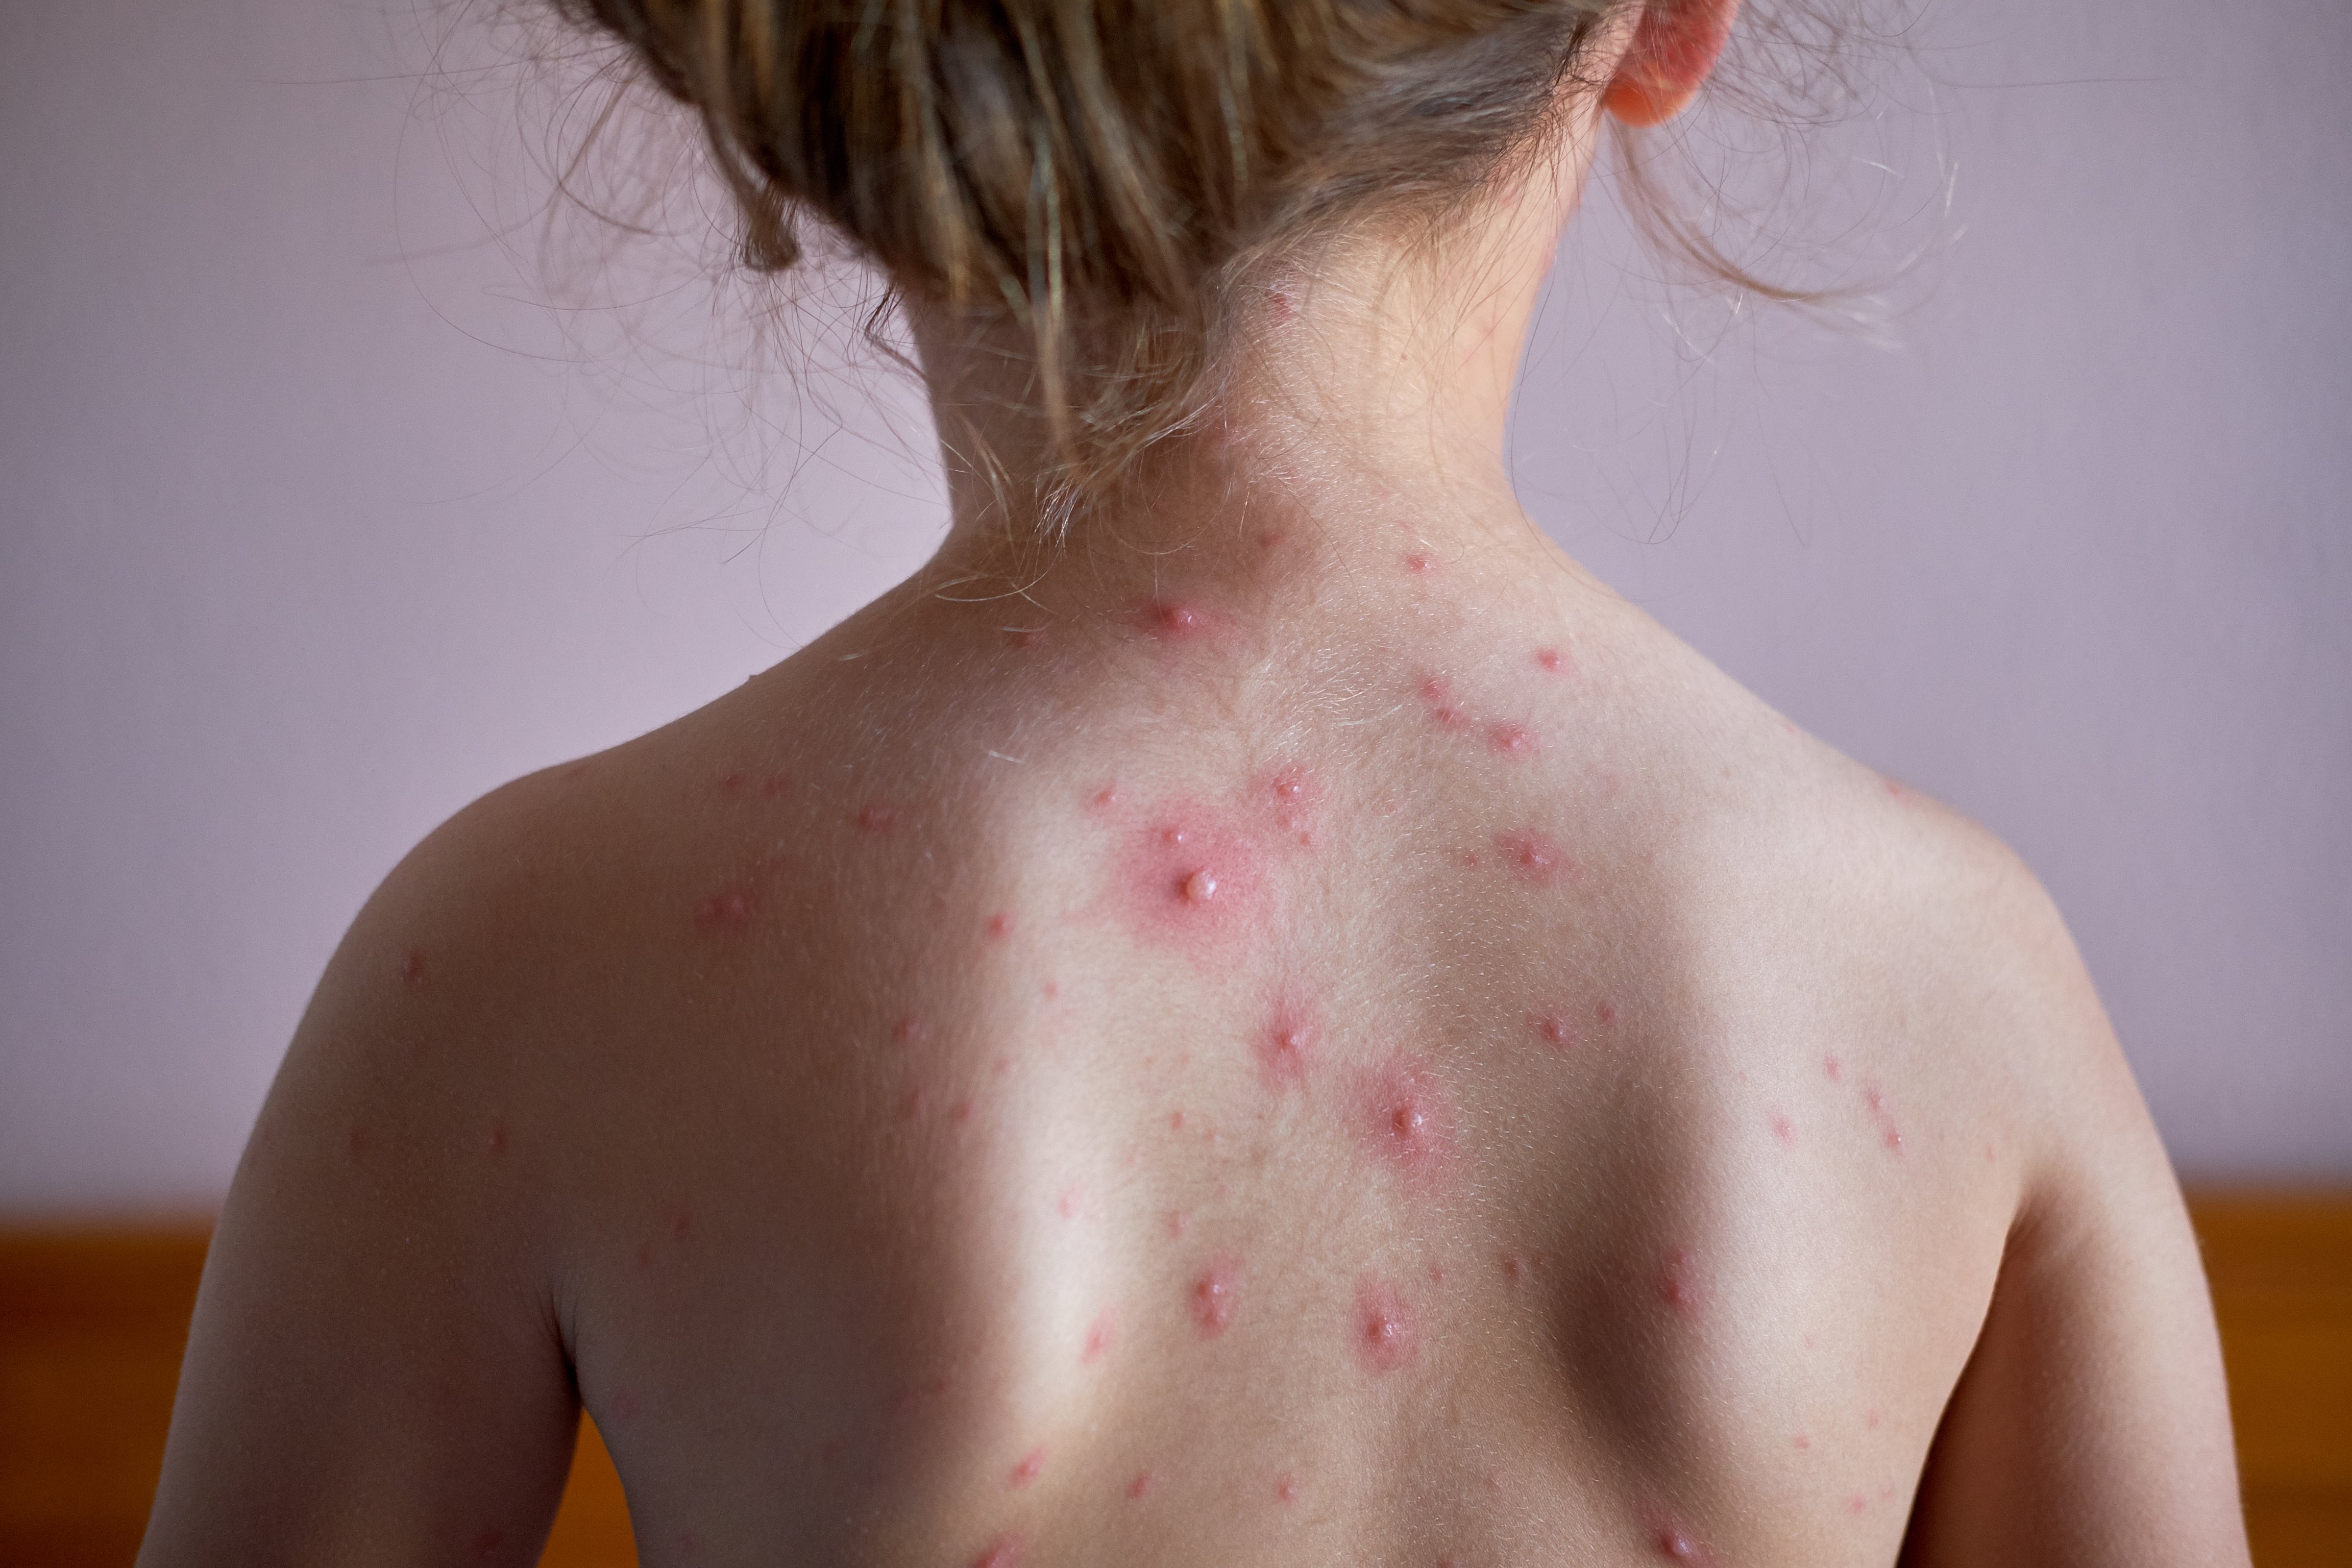 Rear View Of Shirtless Girl With Chickenpox